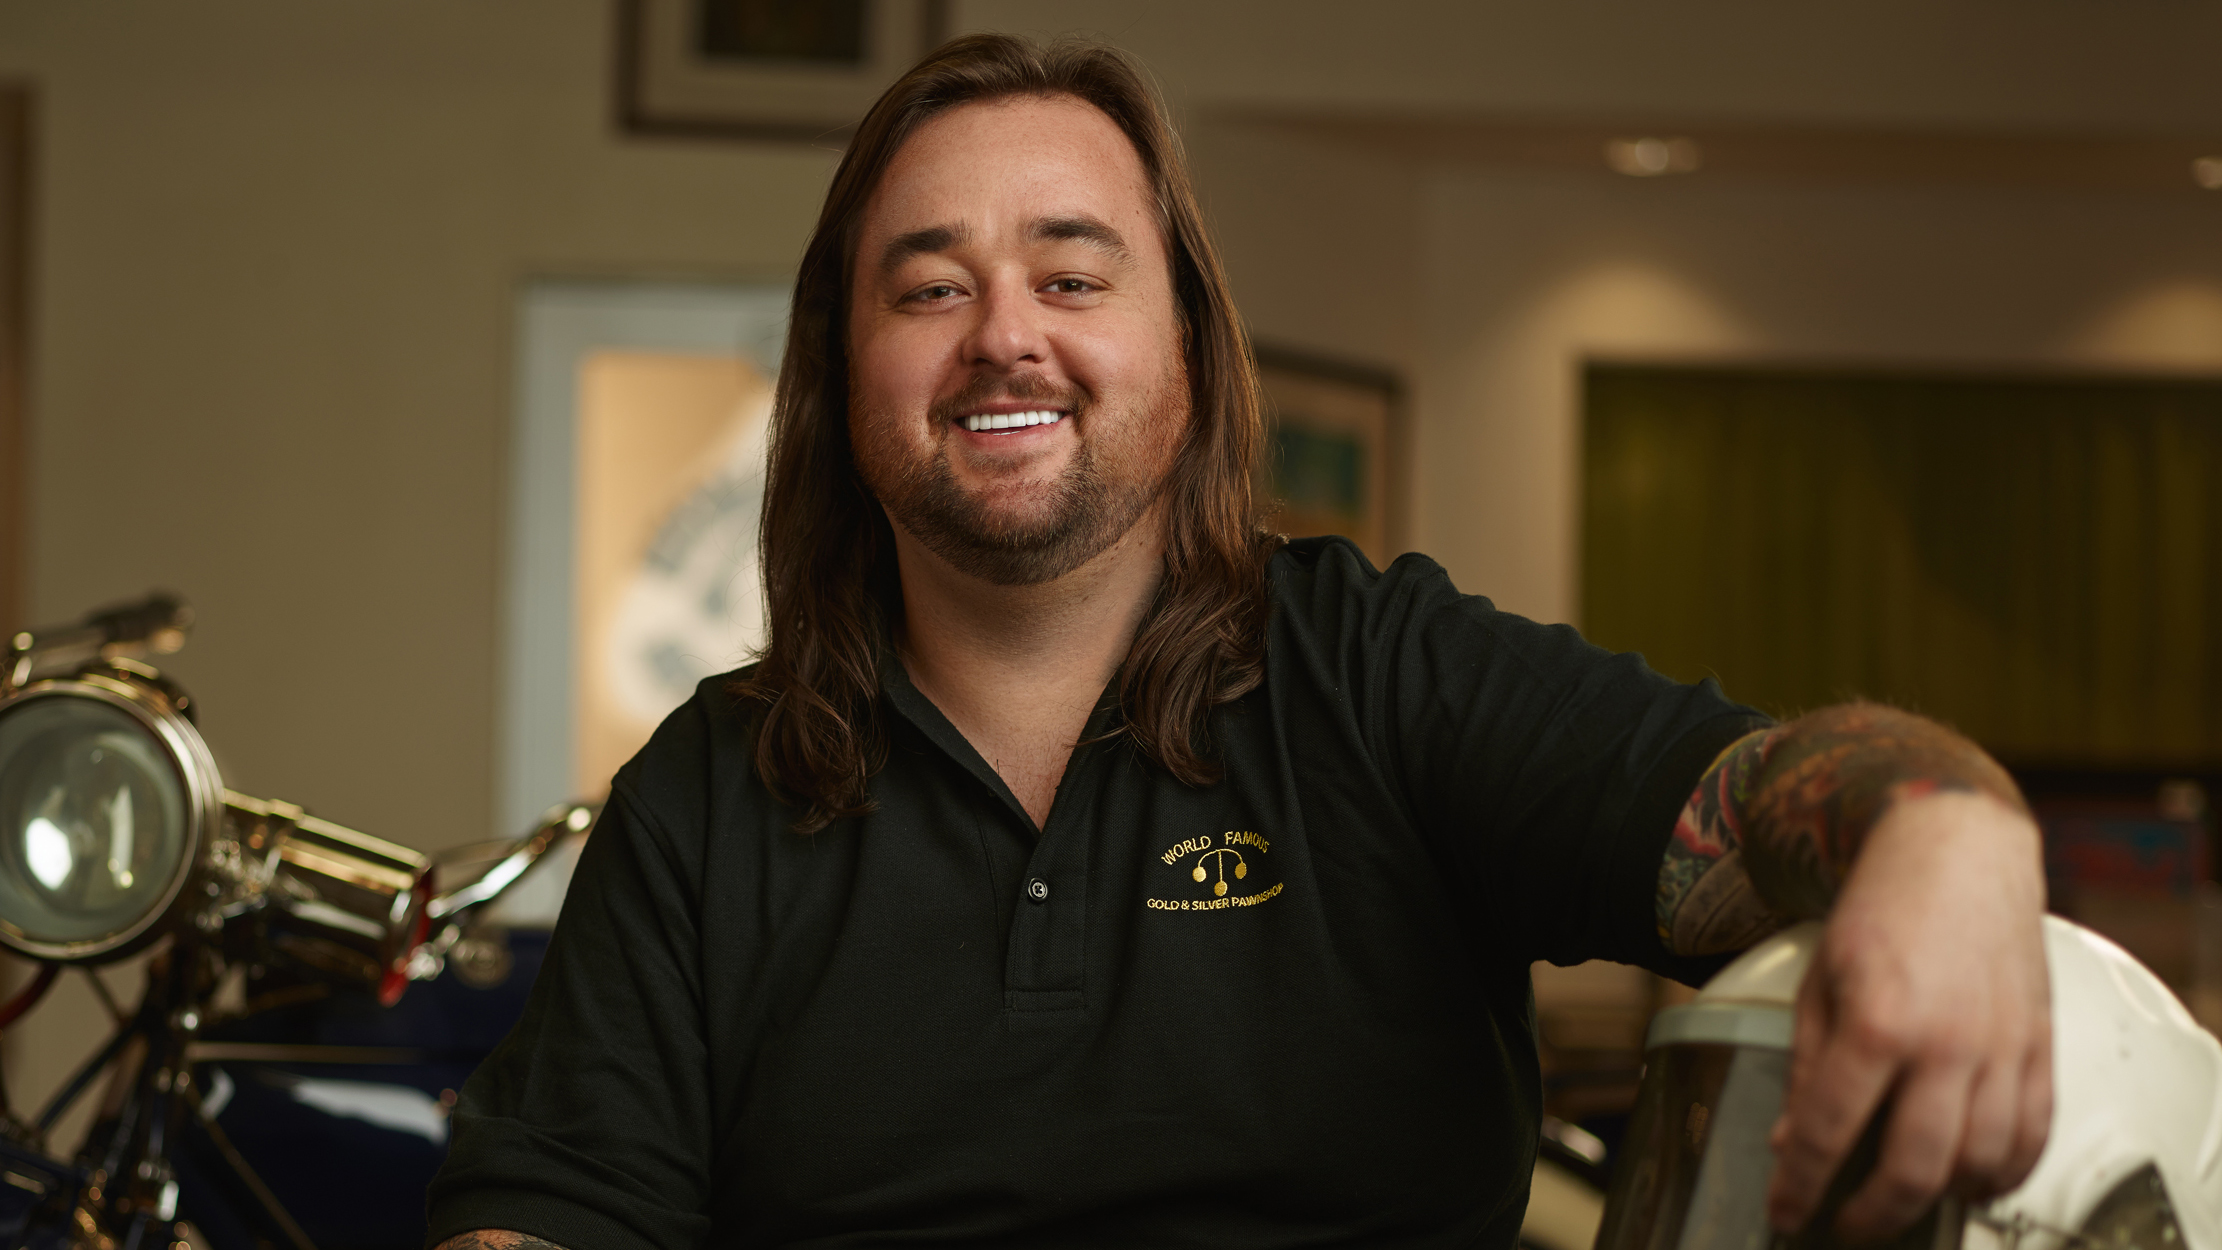 What Happened To Chumlee - Reality TV Star To Criminal Defendant